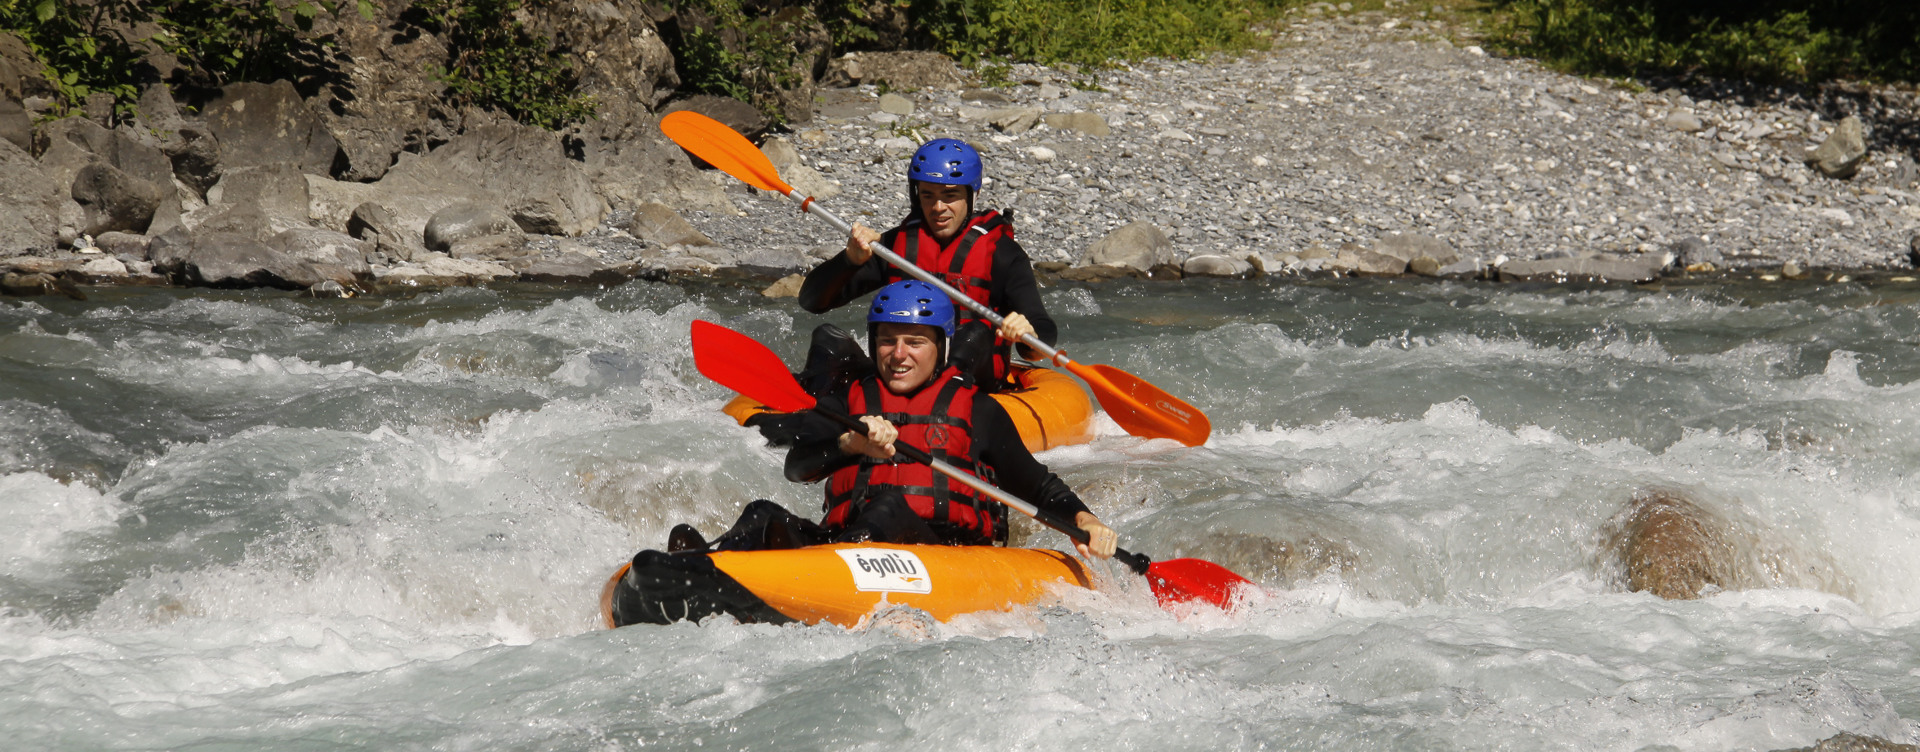 Enjoy the best activities for an unforgettable stay
in the French Alps